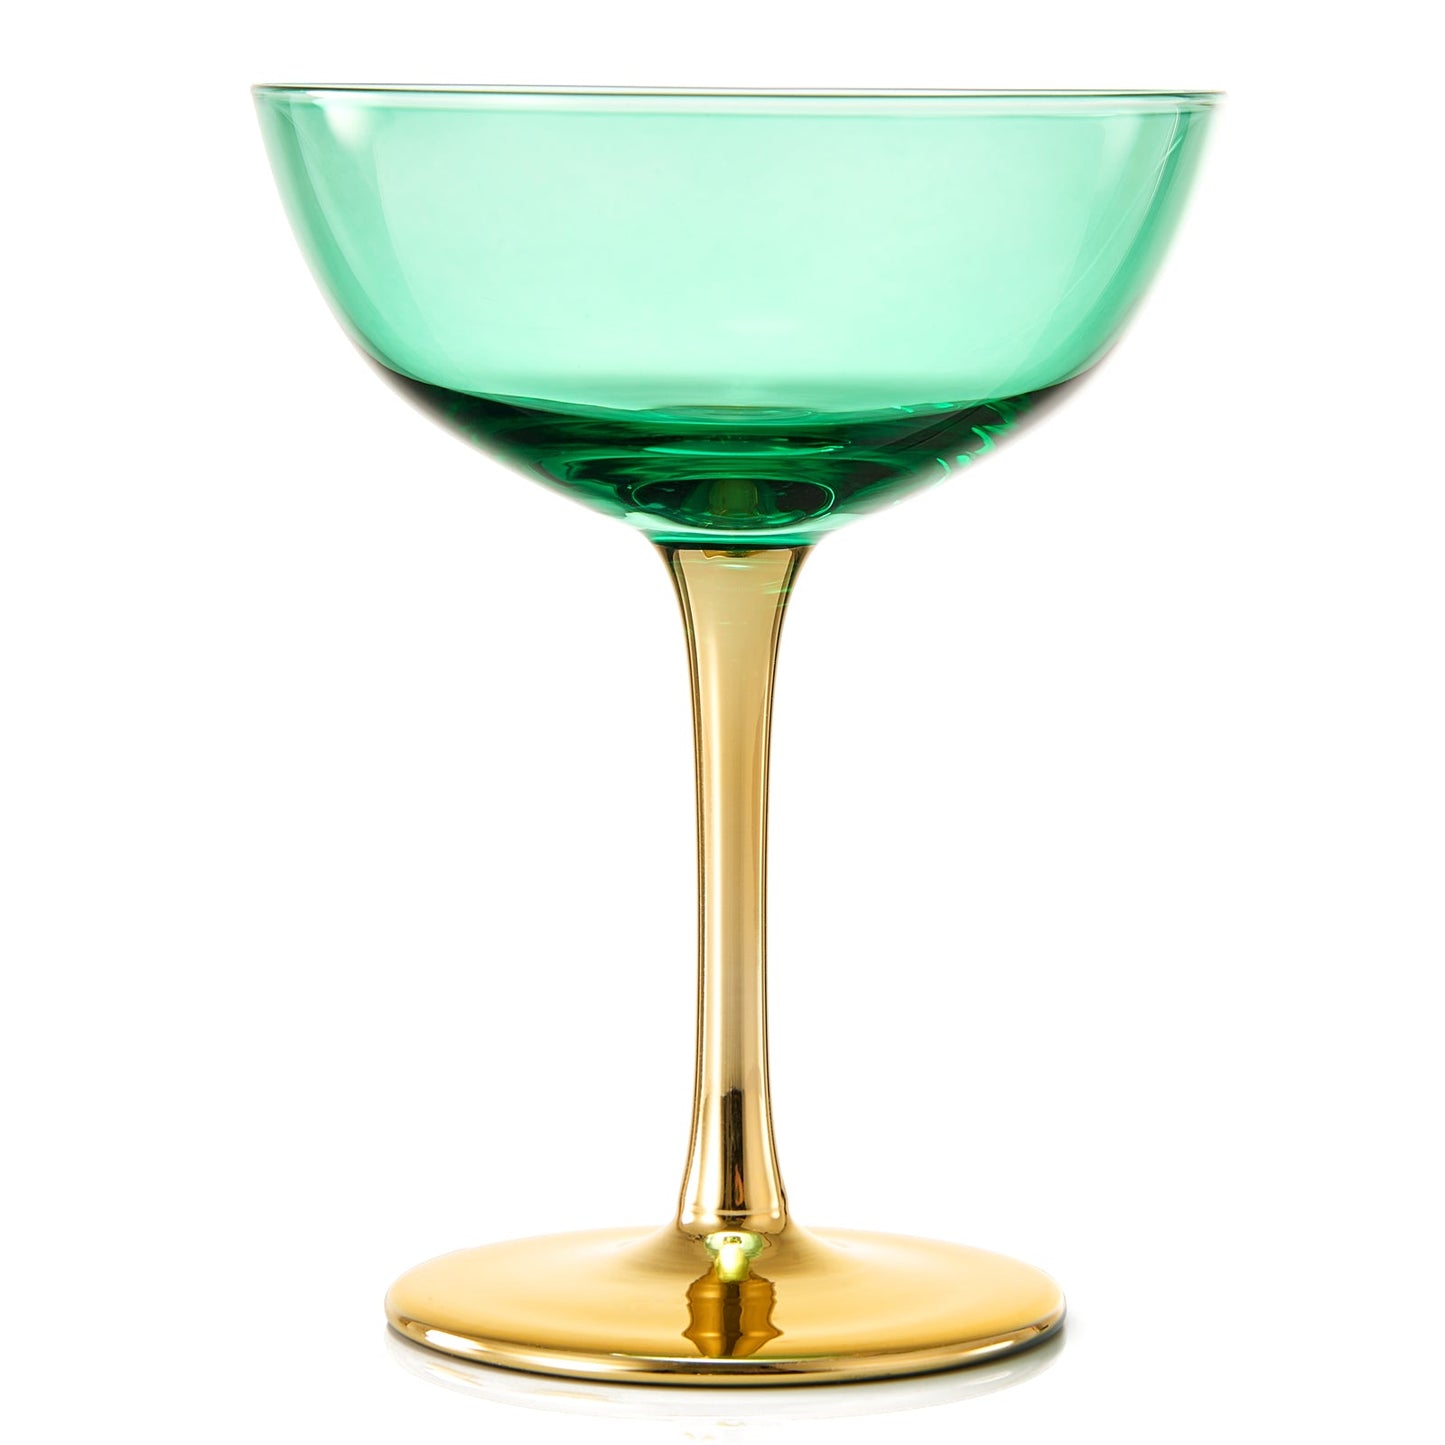 Deco Coupe Cocktail Glassware, Set of 4